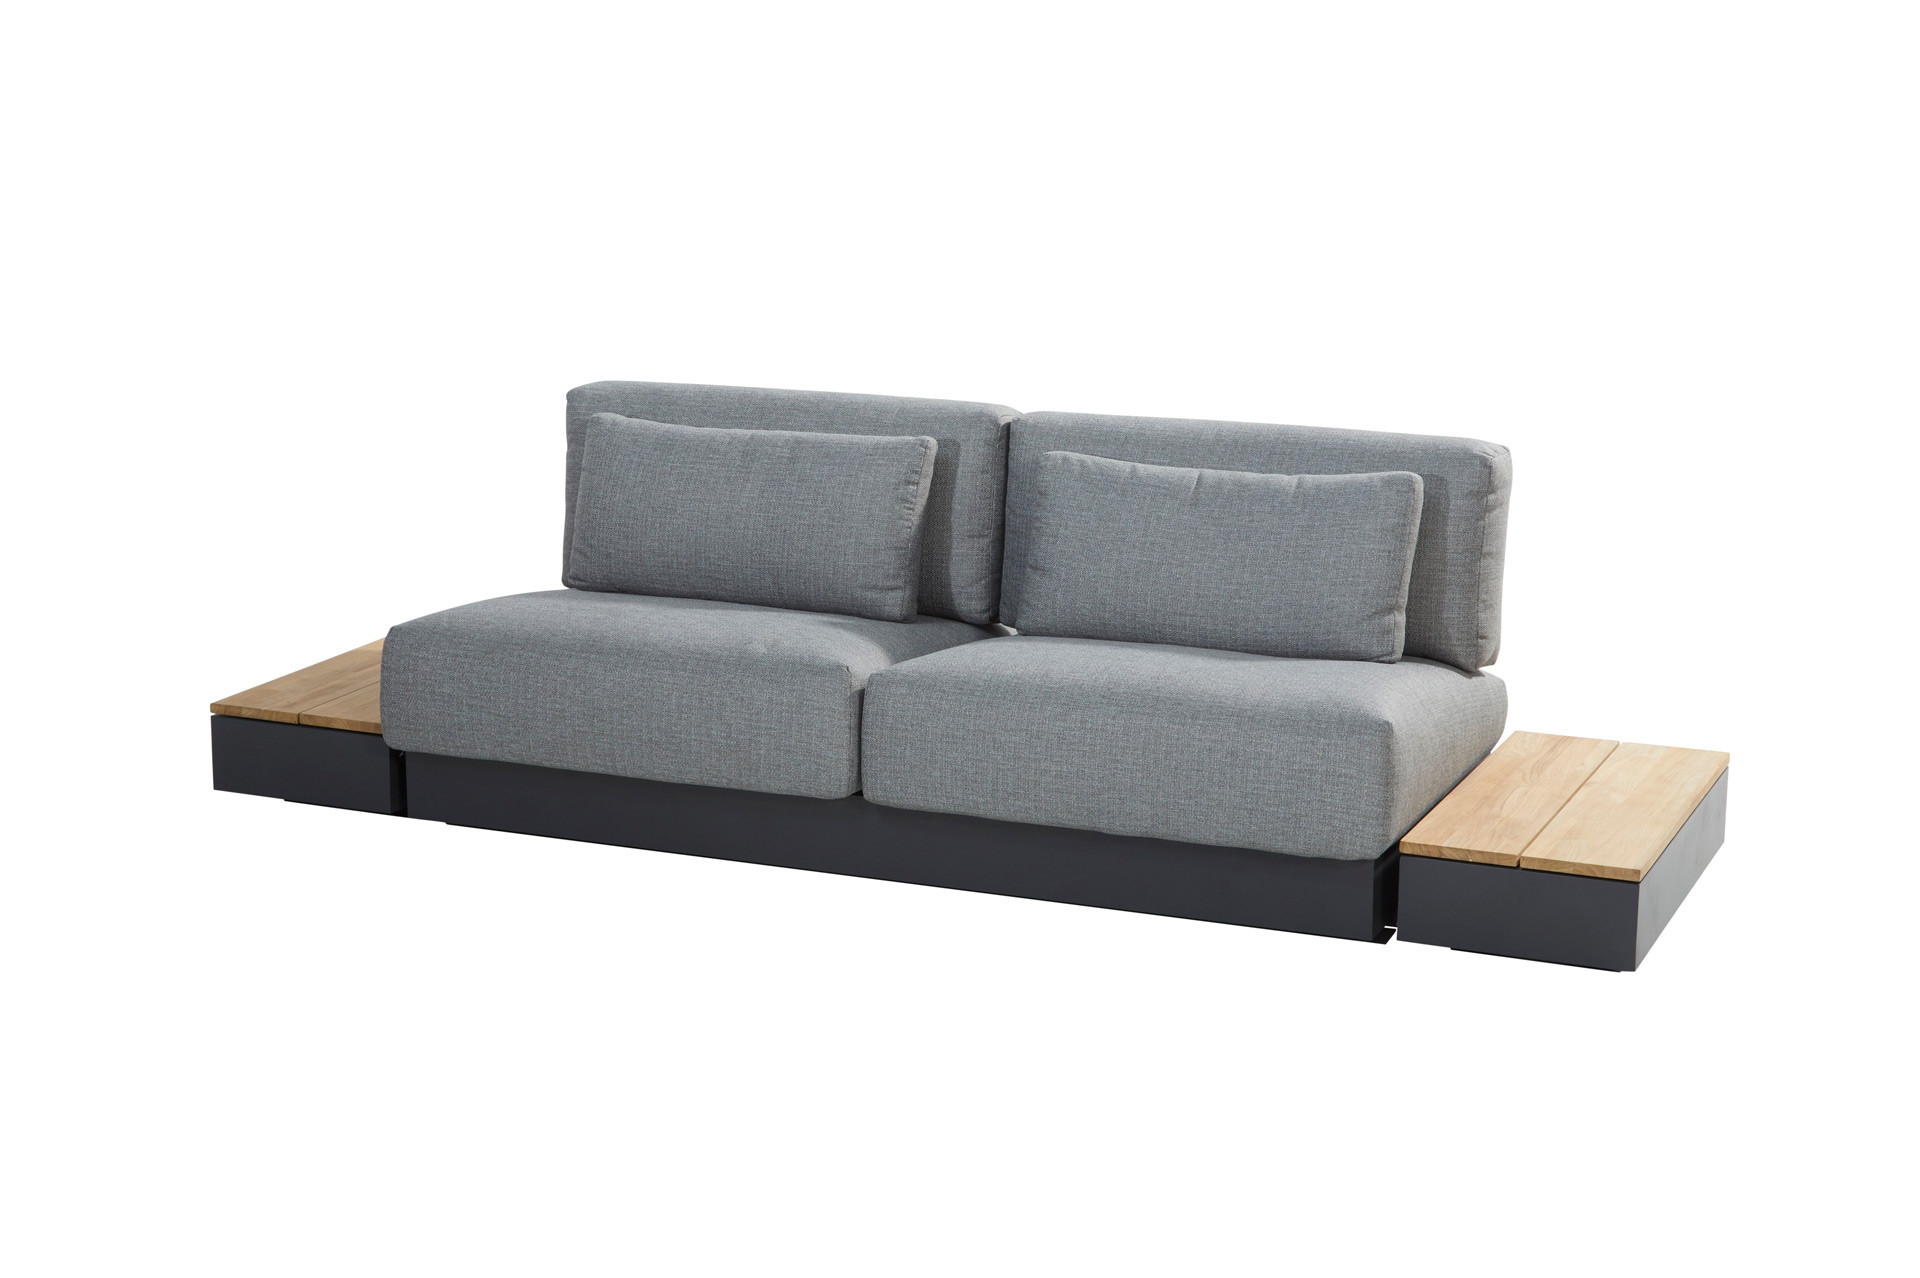 Ibiza modular 2-seater with 2 side tables